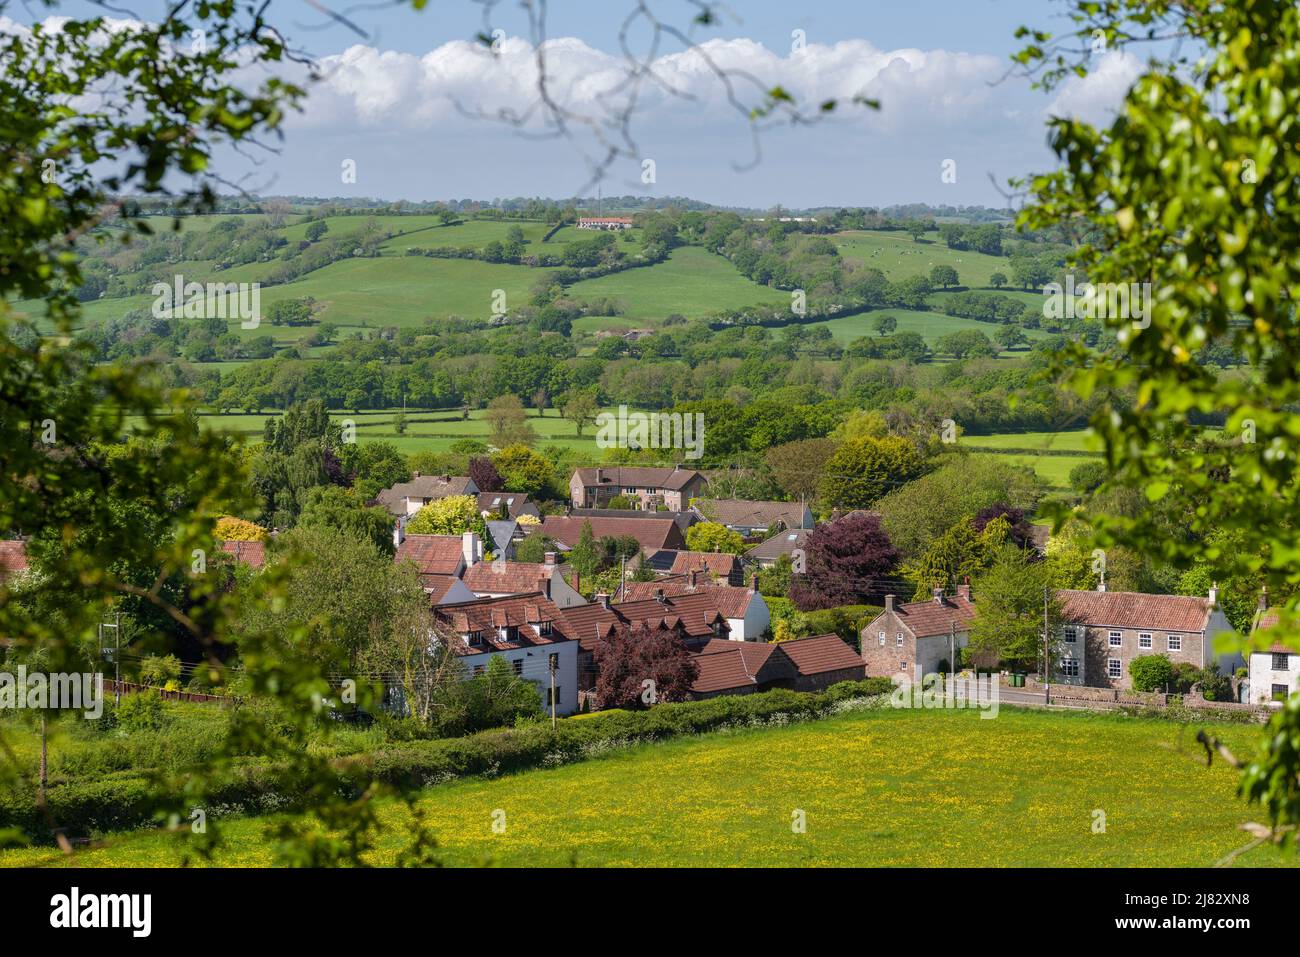 The village of Compton Martin at the foot of the Mendip Hills in the Chew Valley area, Somerset, England. Stock Photo